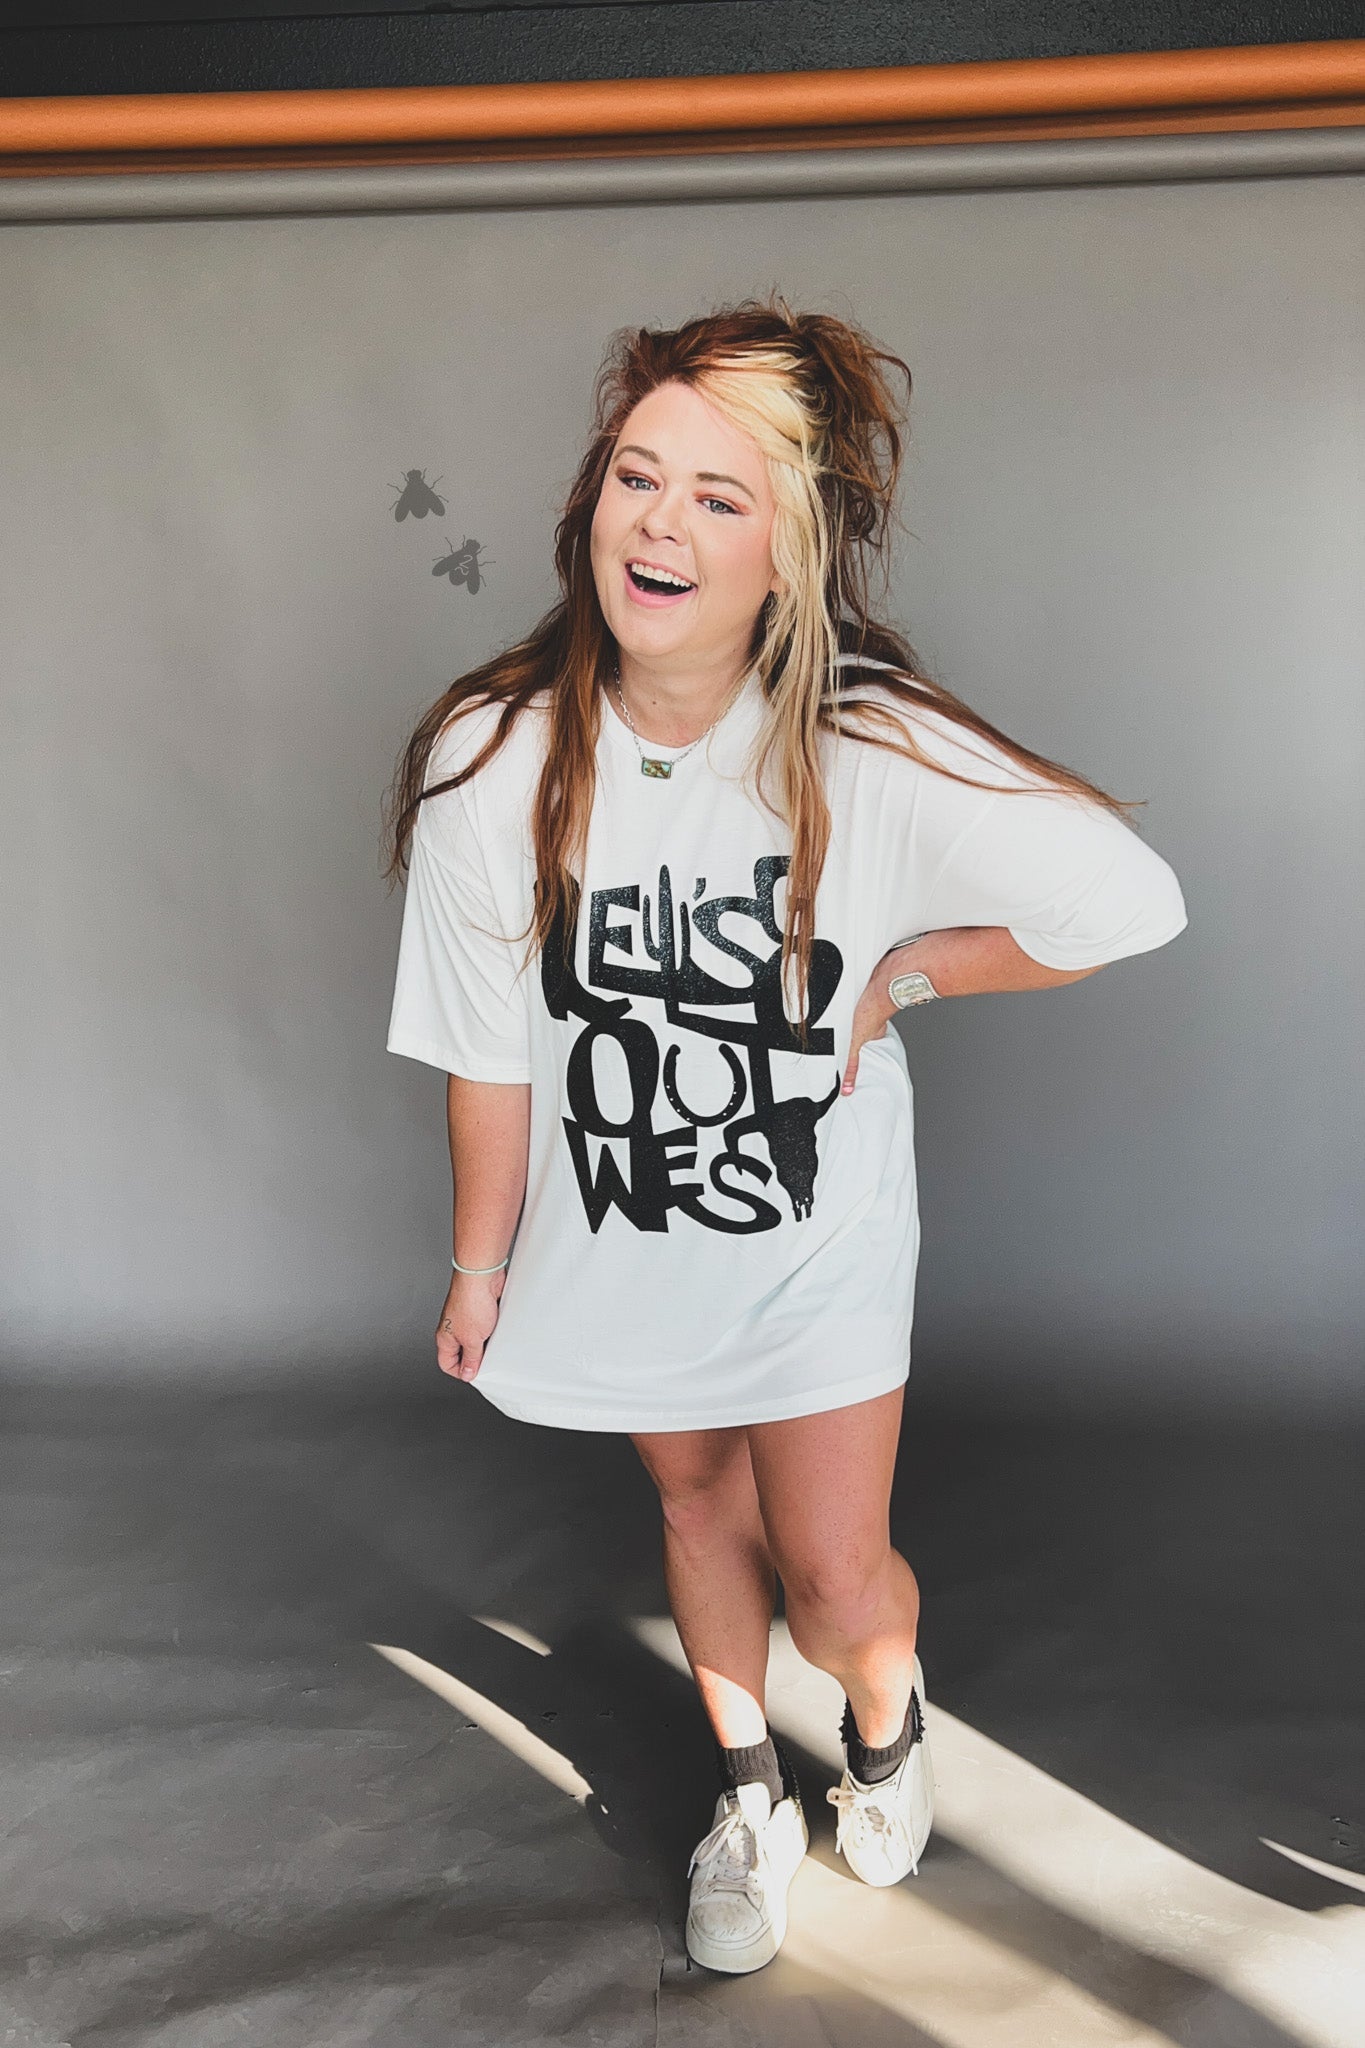 Let's Go Out West Tshirt Dress